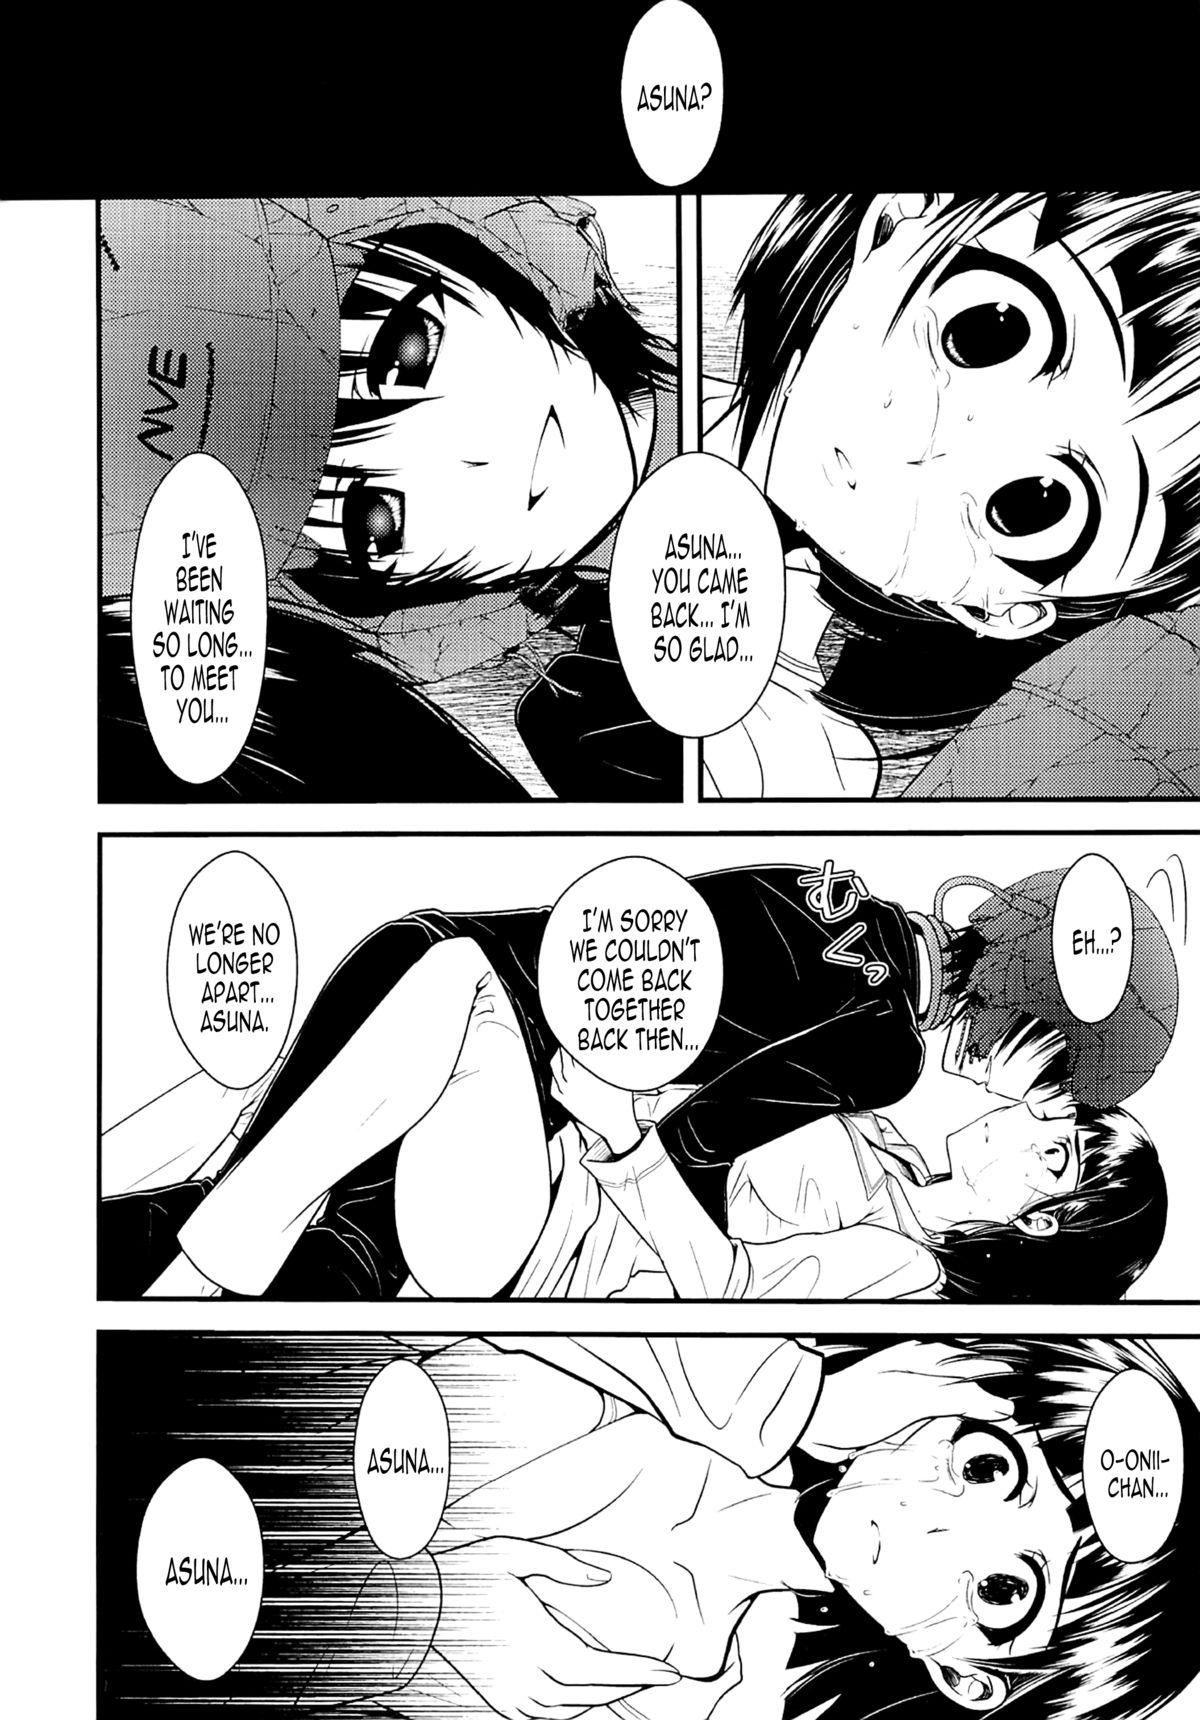 Riding Cock Wakuraba Ochite Kimi Idaku Hibi | The Days the Blighted Leaves Fell, and I Embraced You - Sword art online Hot Girls Getting Fucked - Page 11